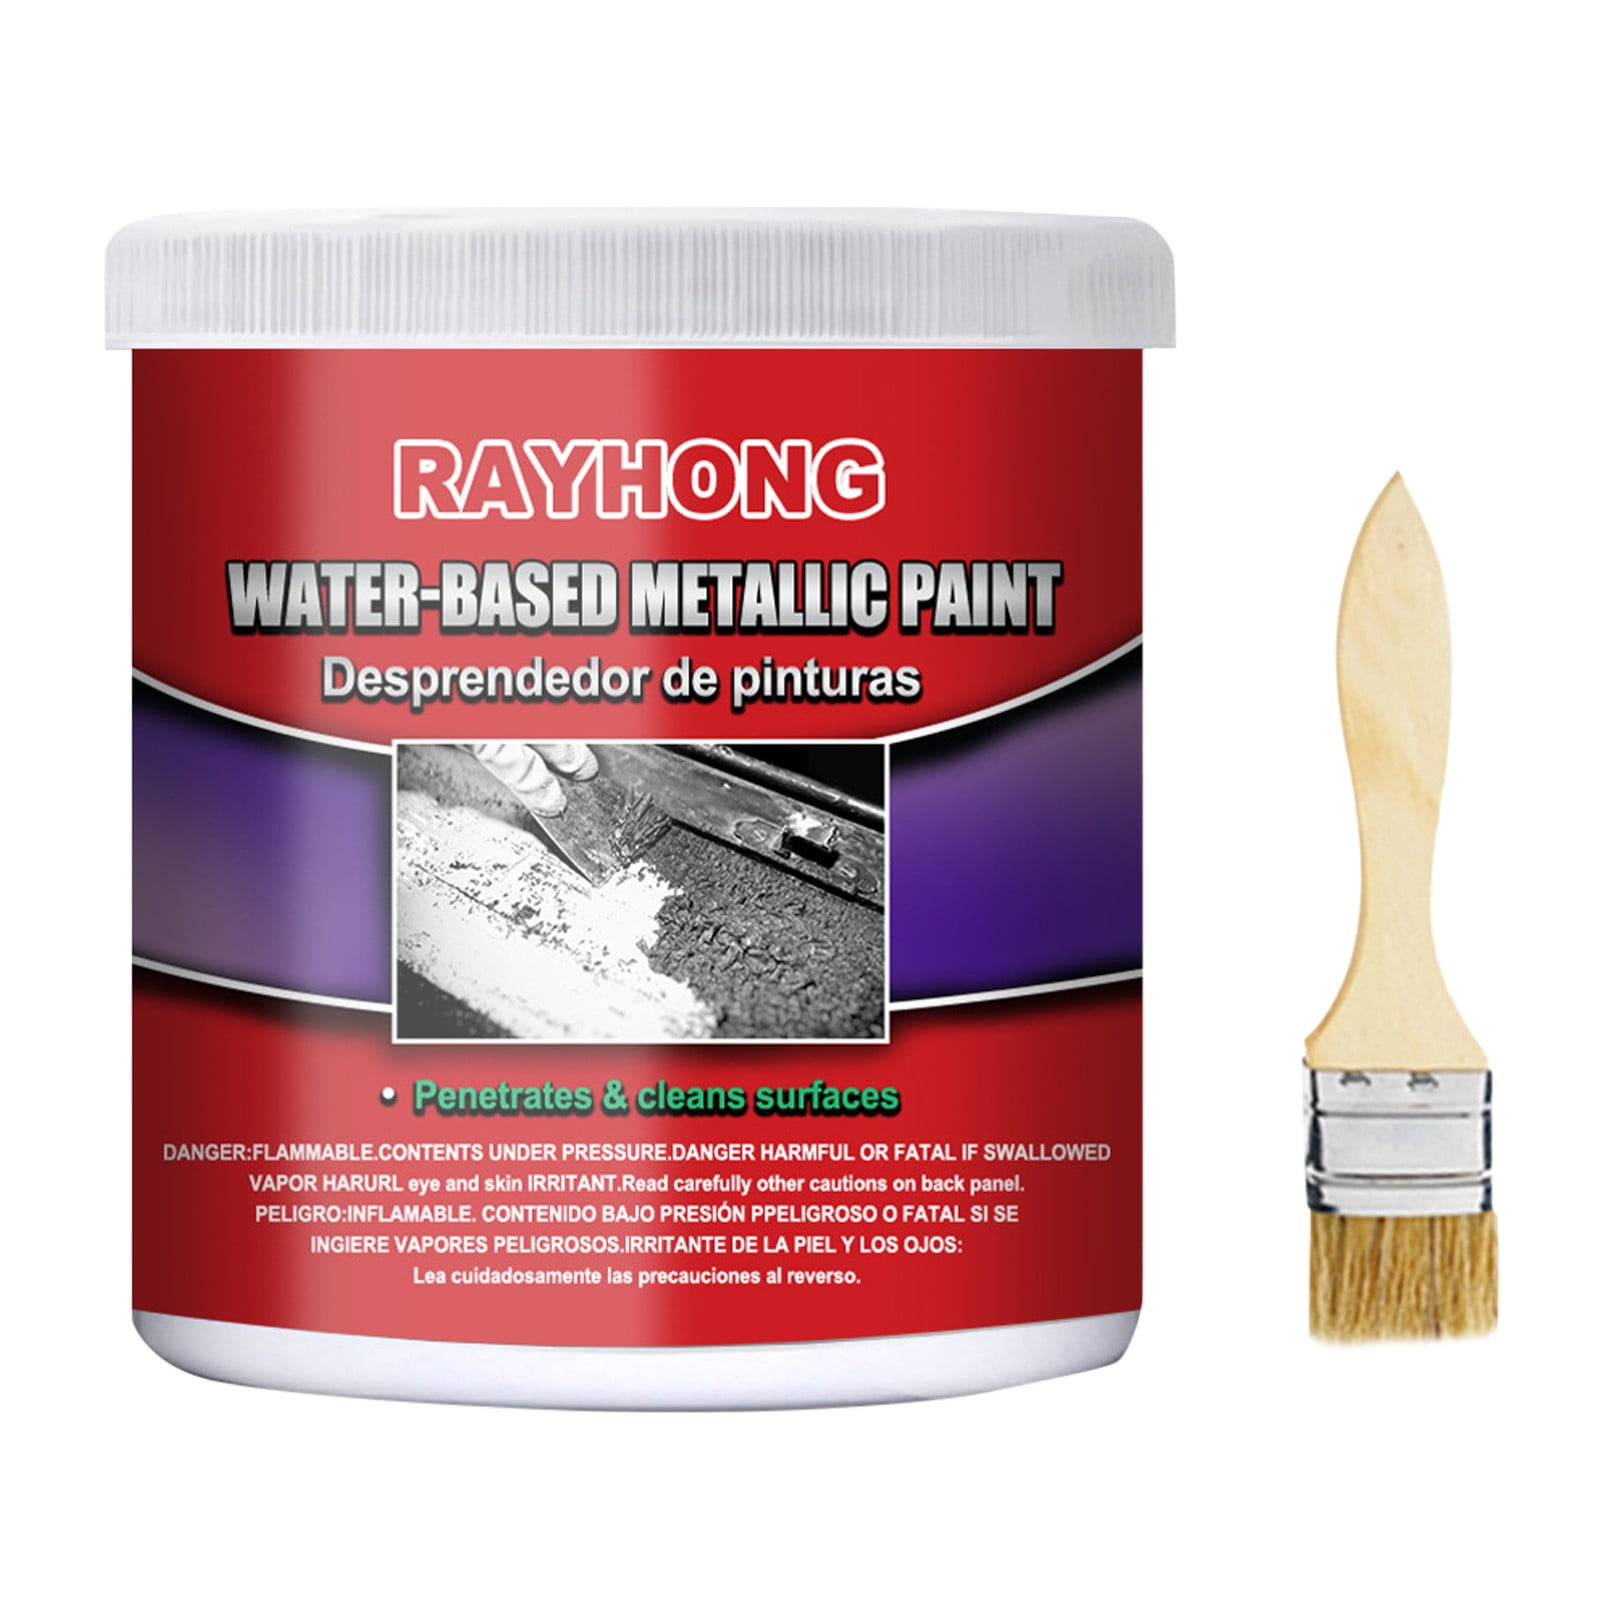 Polishing & Cleaning Kit for Epoxy Resin (Stone Coat Countertops) – Remove Scratches from Epoxy Projects After Sanding! Smooths Out Counters, Tables